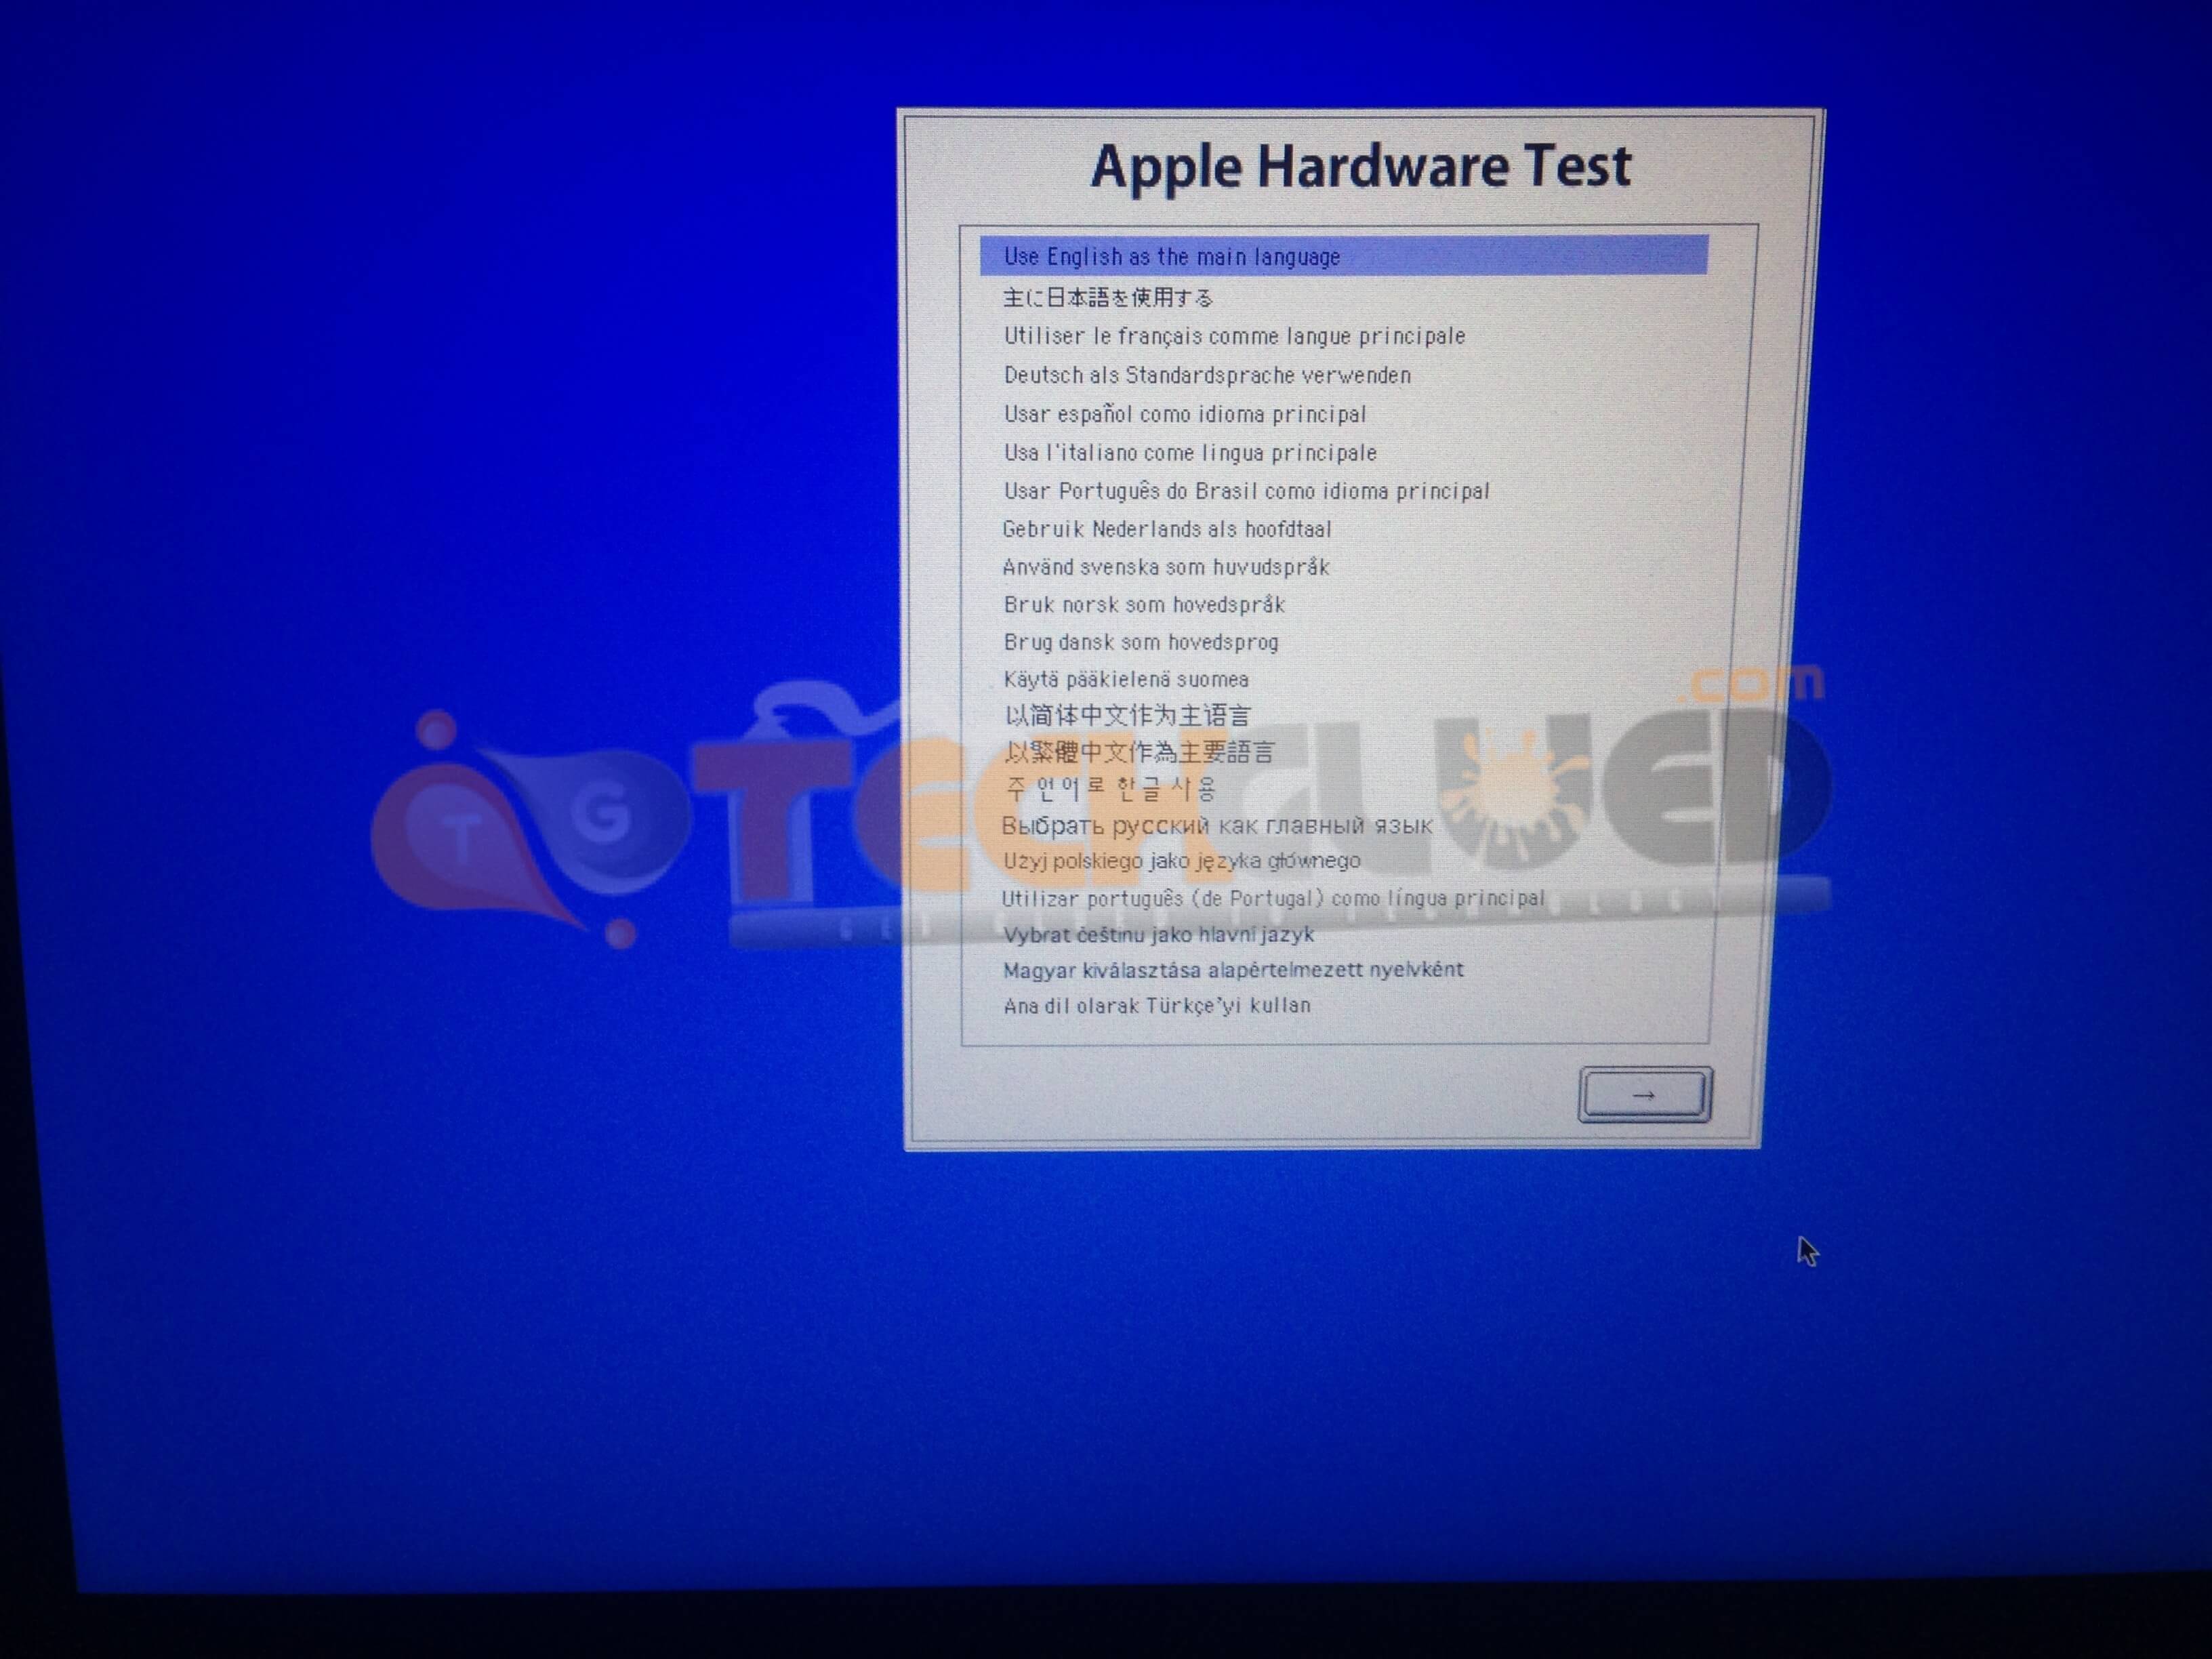 AHT_apple_hardware_test_how_to